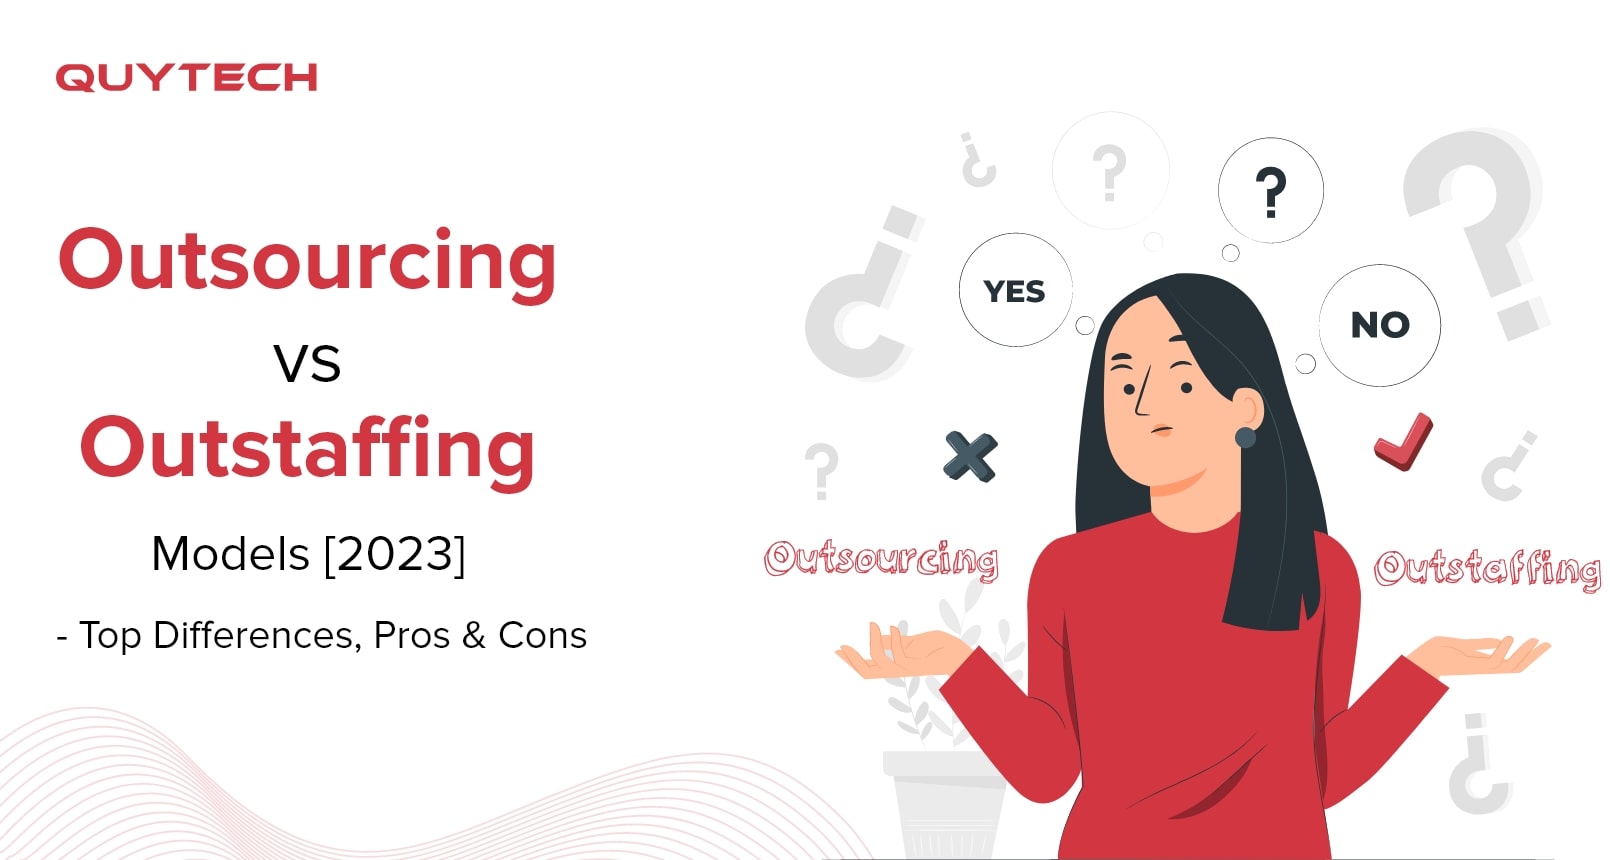 Outsourcing vs Outstaffing Models-Top Differences, Pros & Cons